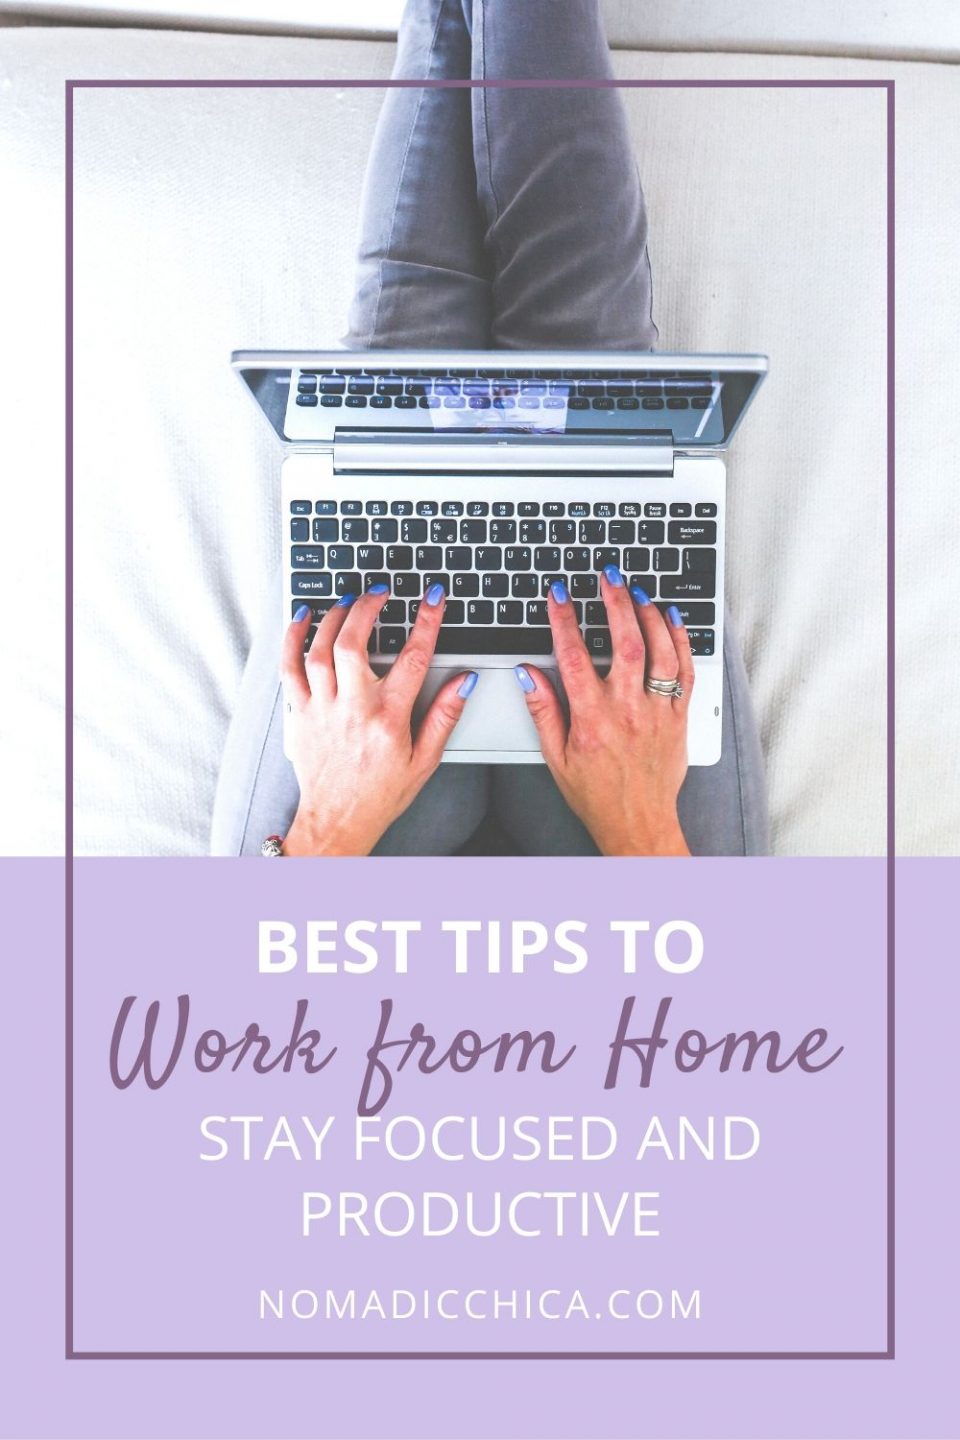 Tips to Work from home